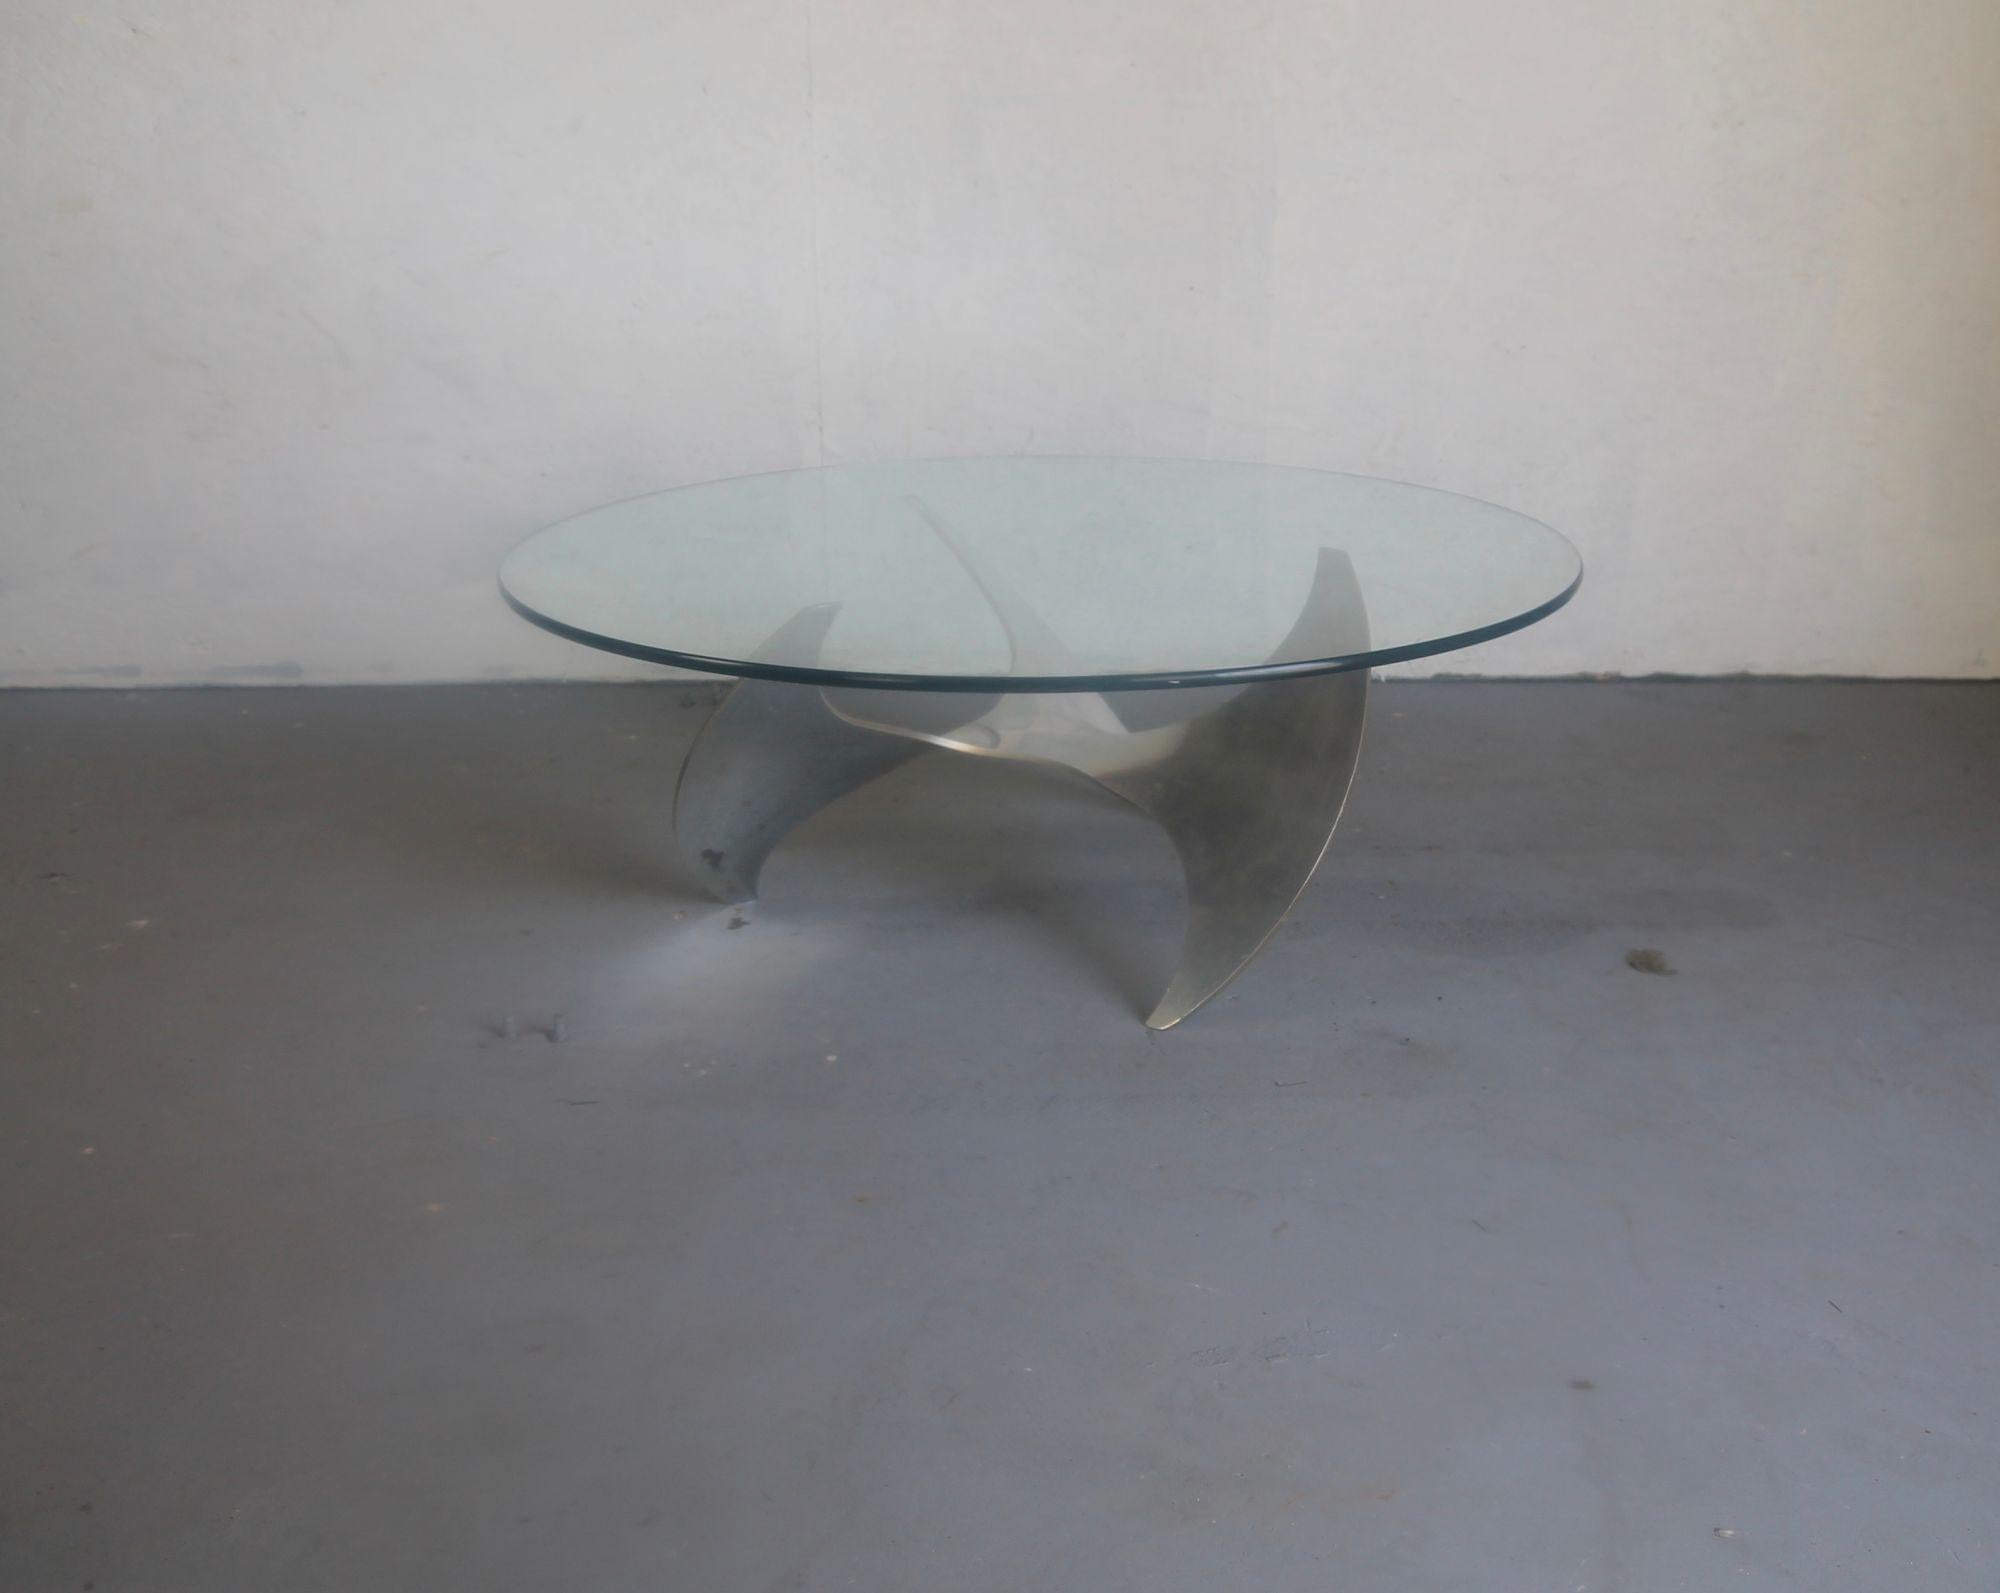 Classic propeller coffee table by the German designer Knut Hesterberg. In nice shape with the original glass top.